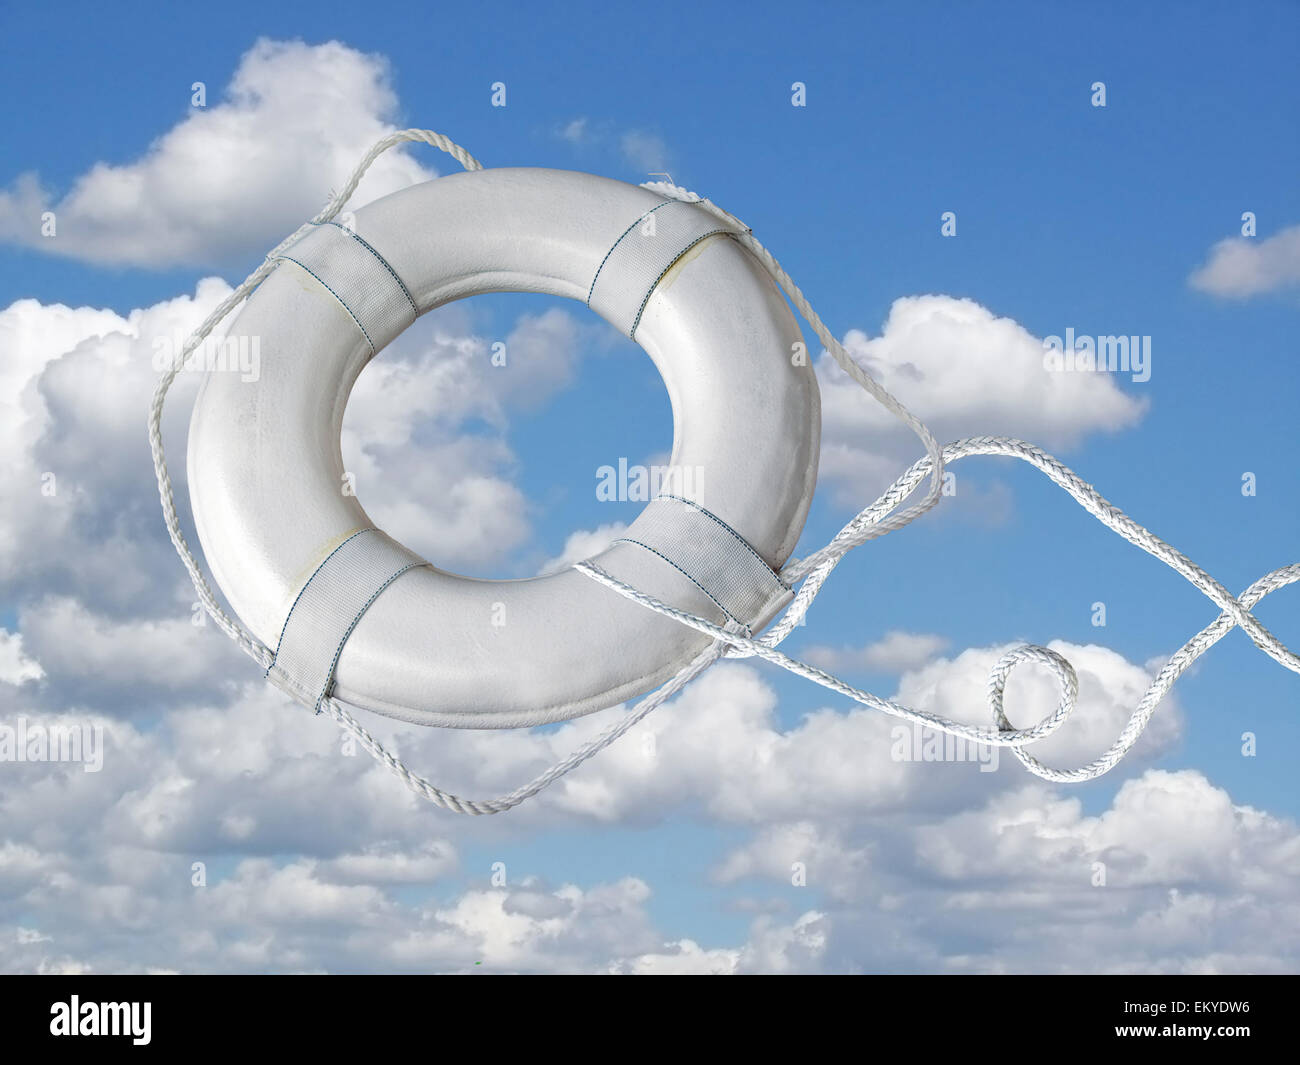 White life ring with rope airborne in sky and clouds. Stock Photo